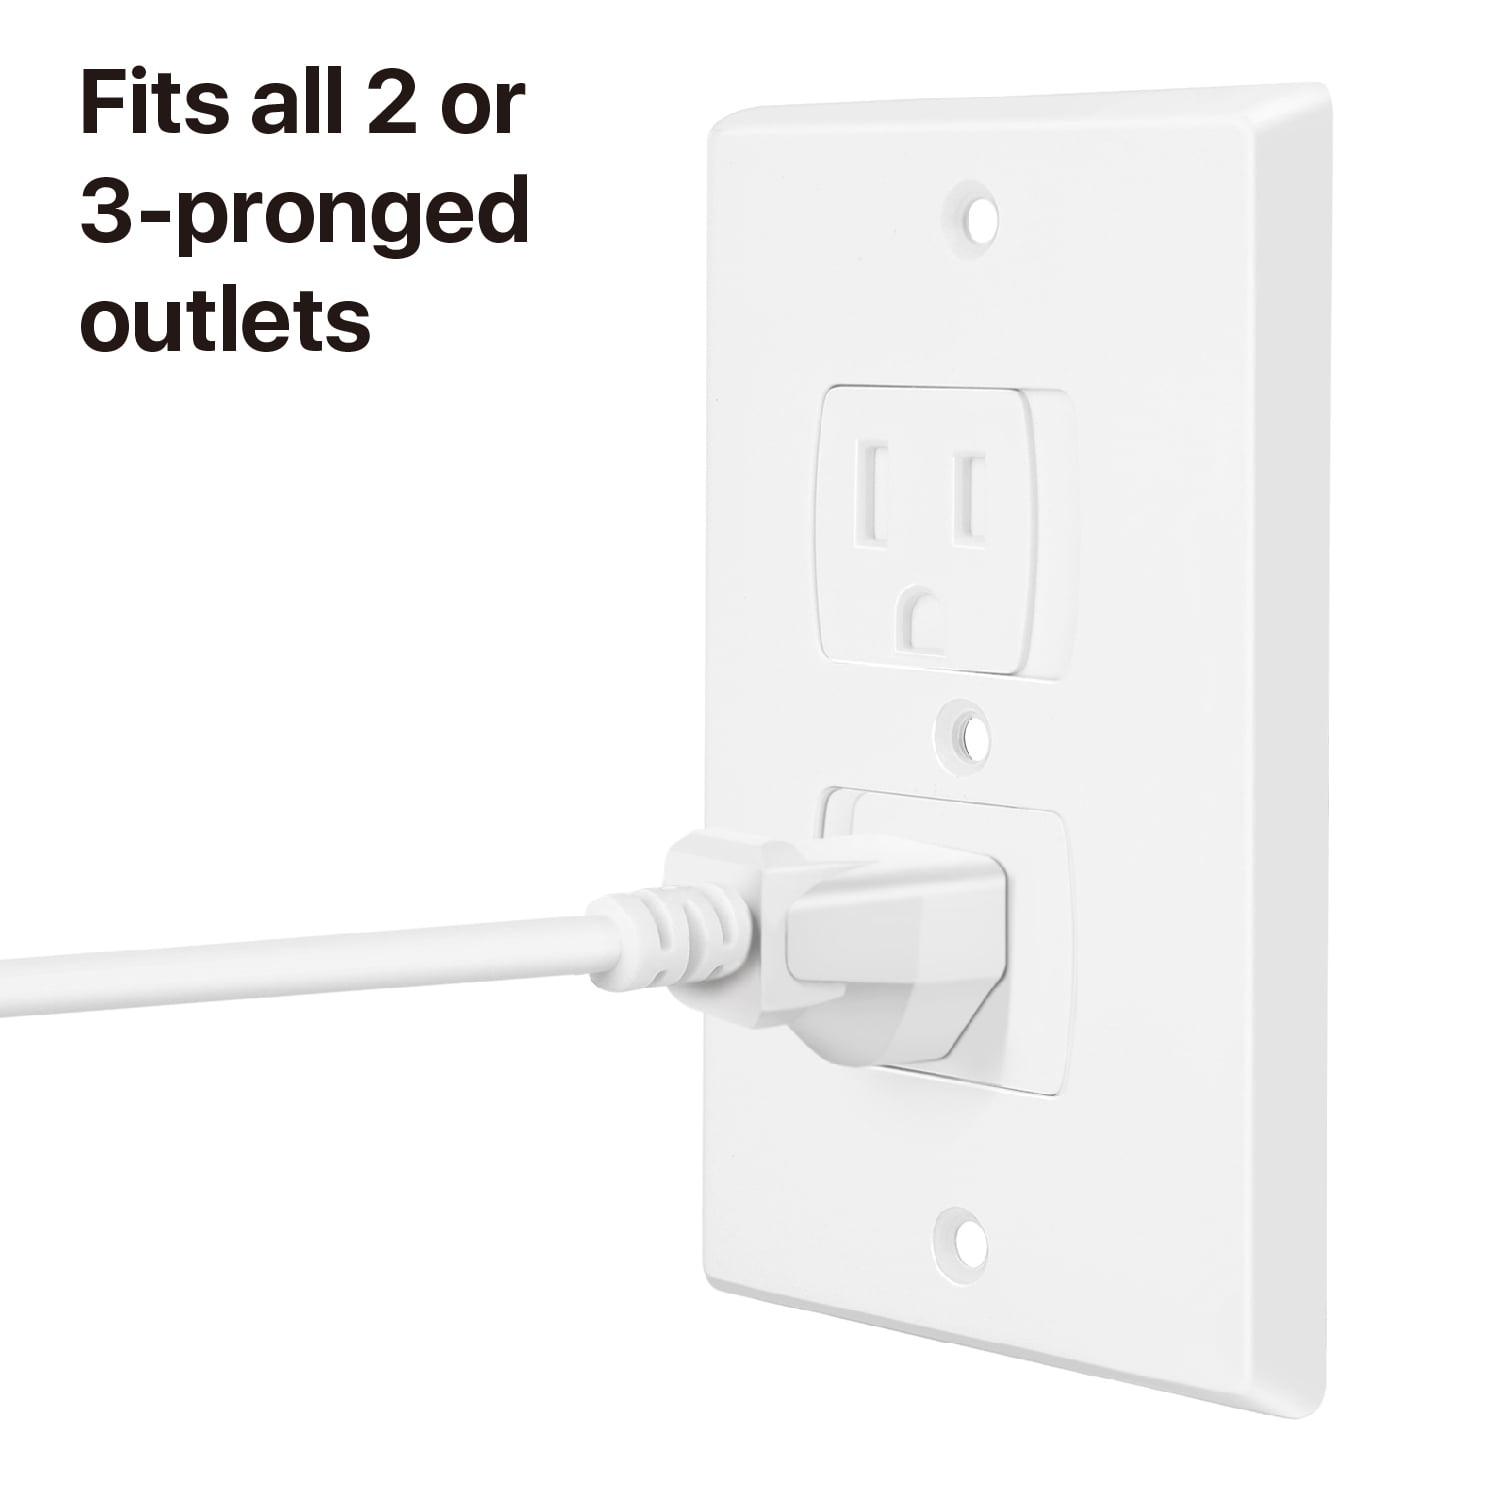 Hardware Included MooMoo Baby Collection Electrical Outlet Covers Universal Self-Closing Outlet Plugs,Child Safety Guards Socket Plugs Protector,BPA Free,4 Pack 